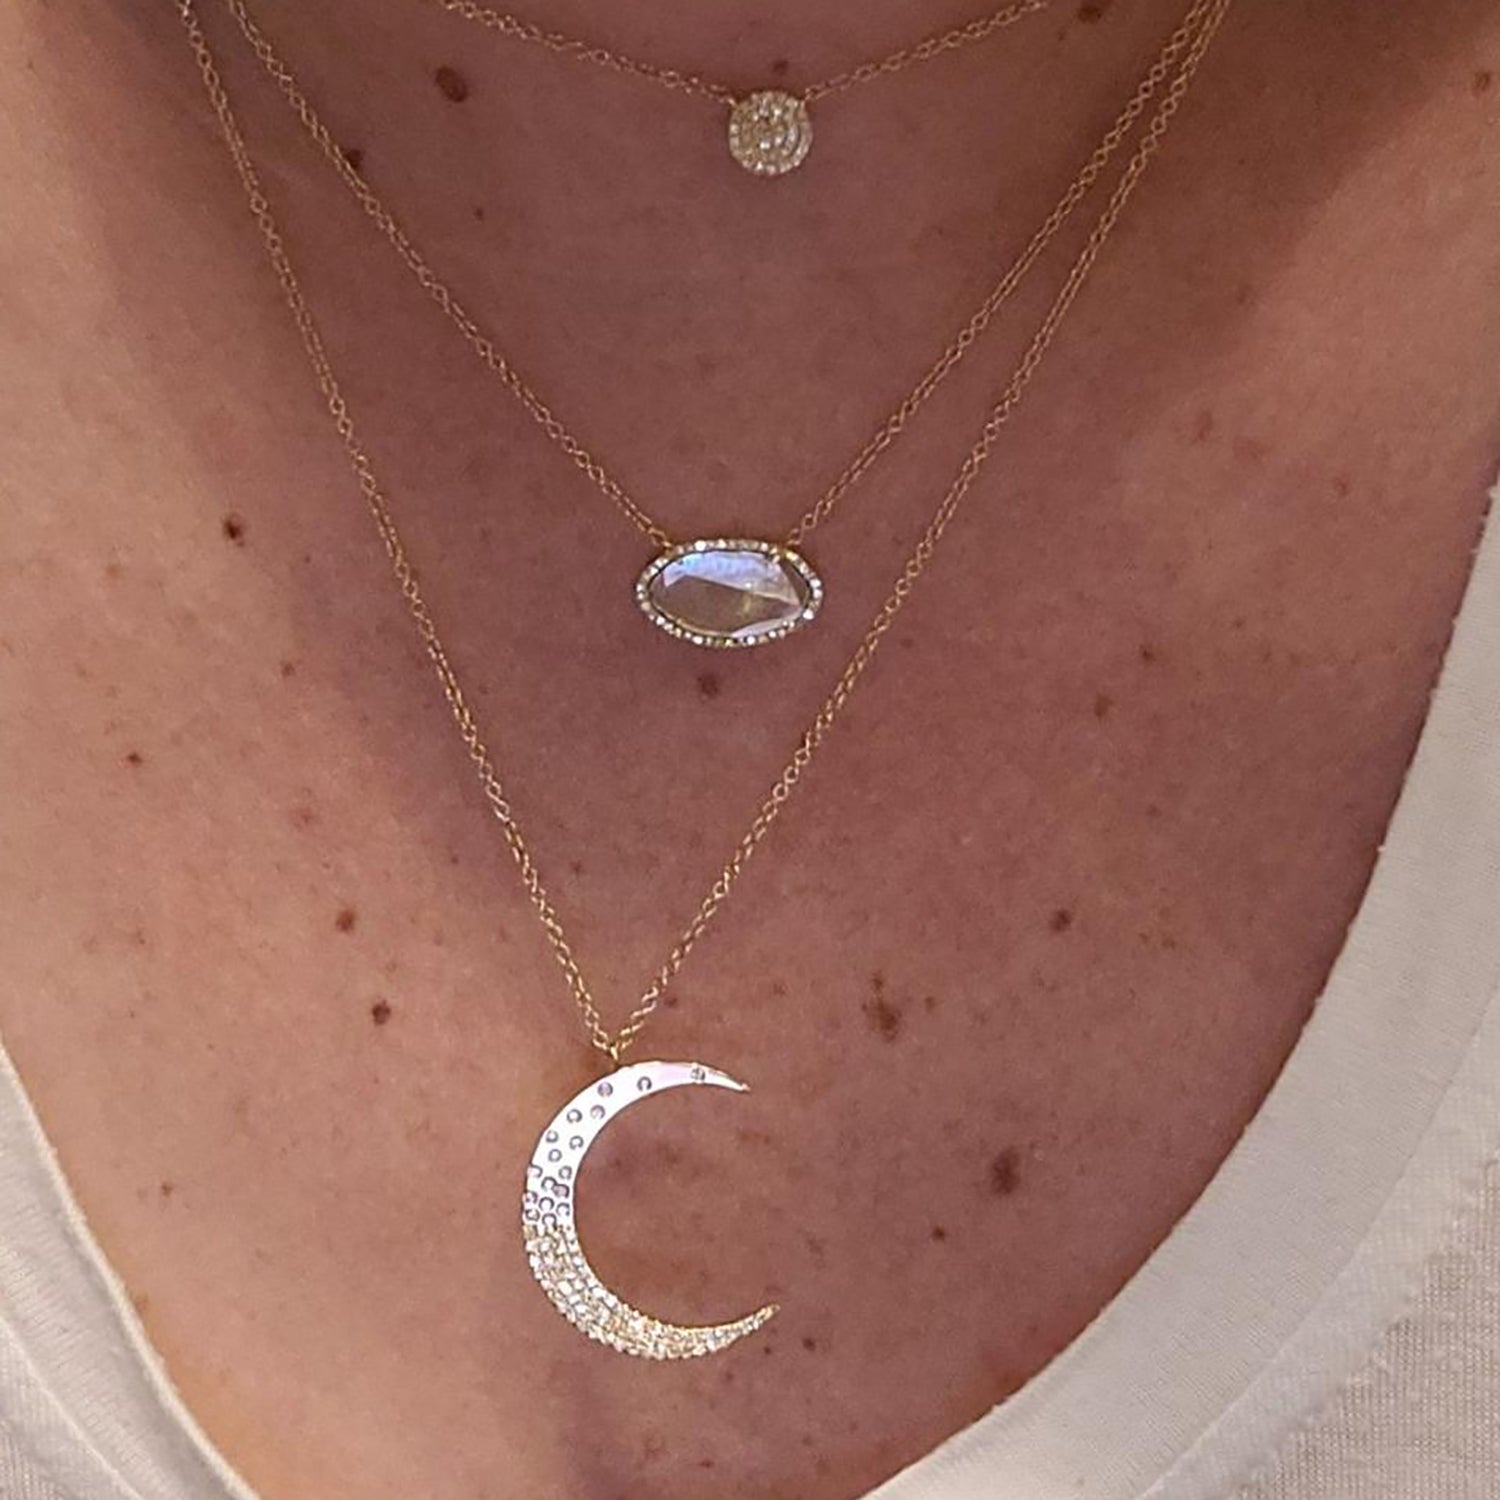 Crescent Moon Necklace With Diamonds in 14k Gold